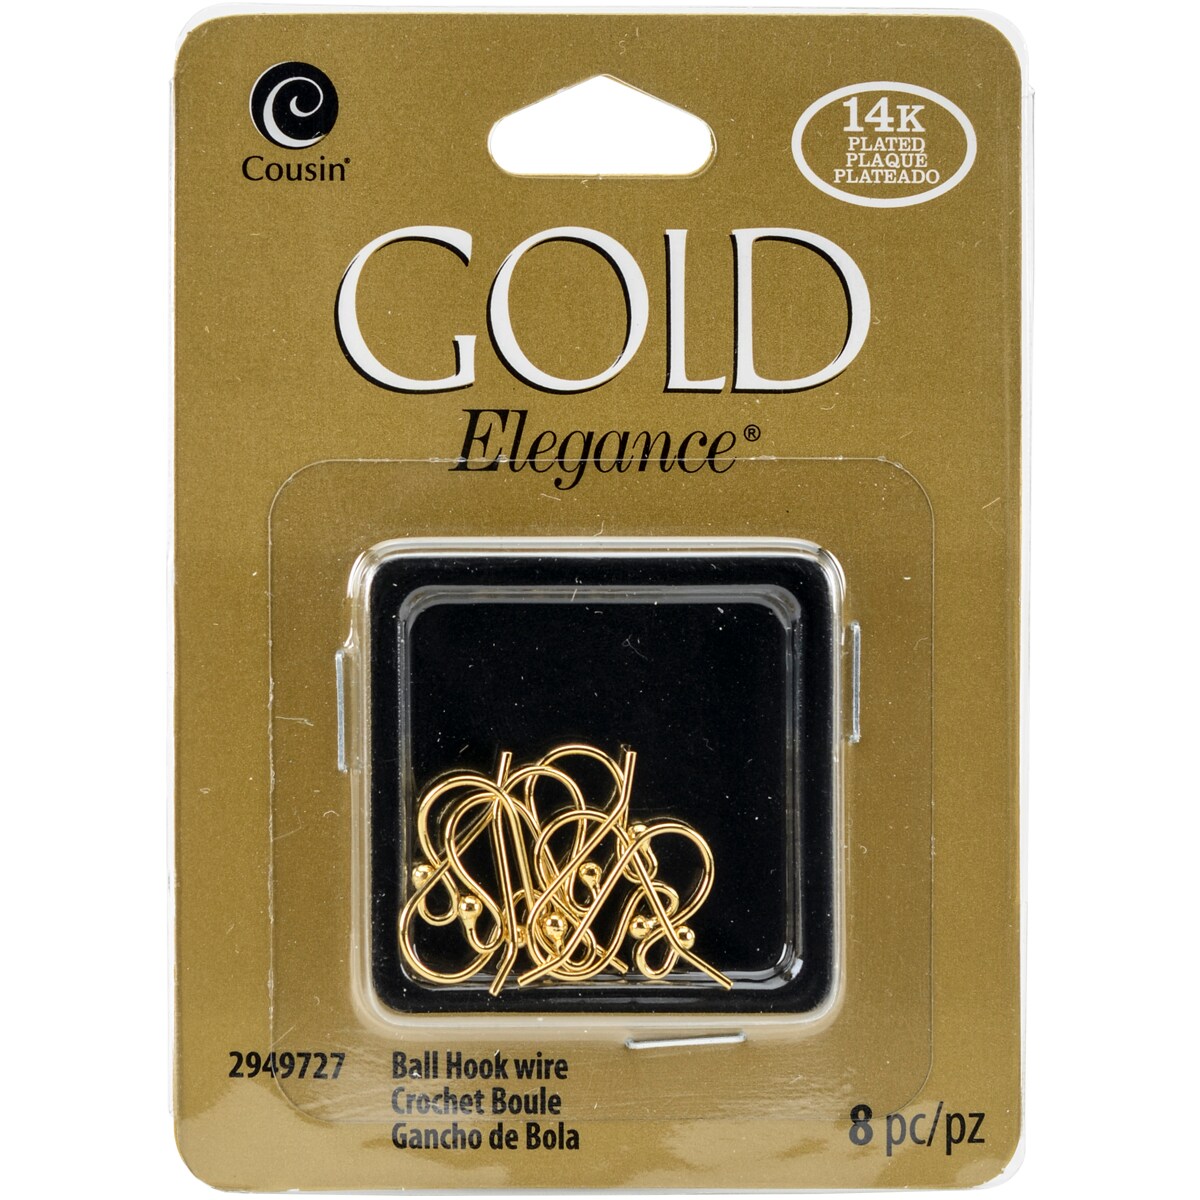 Cousin 14k Plated Gold Elegance Beads &#x26; Findings-Small Ball Hooked Earrings 8/Pkg